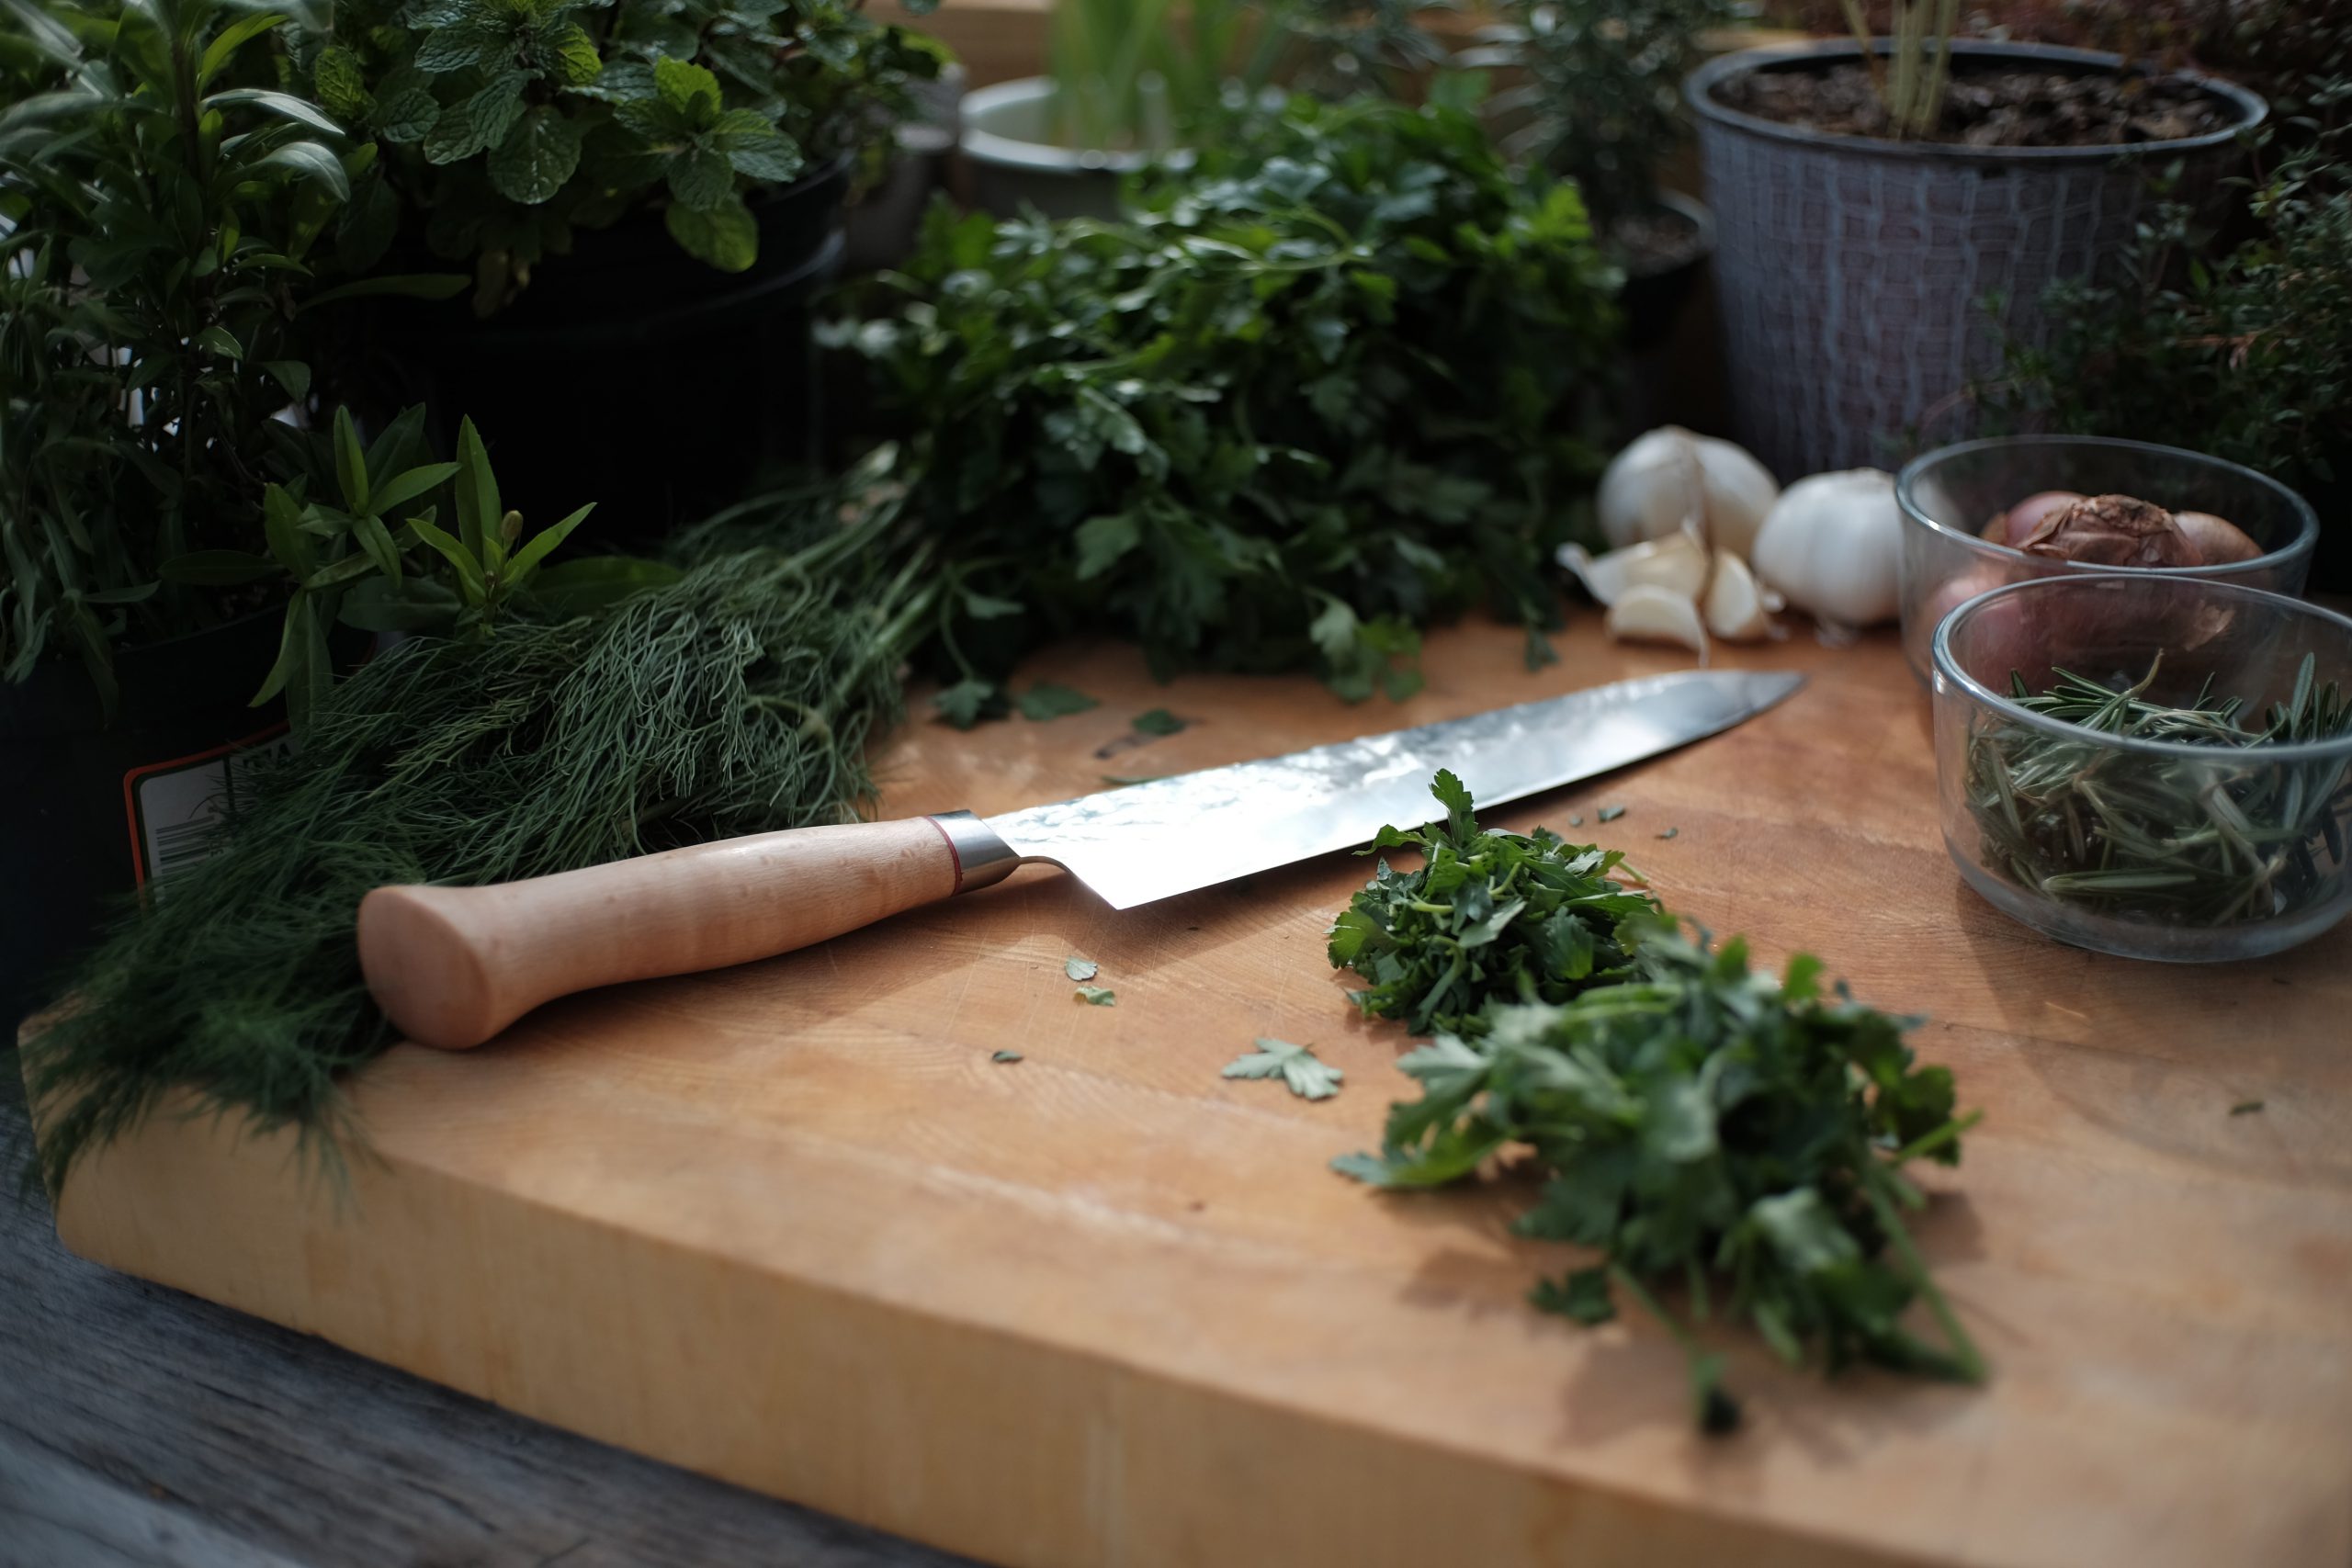 https://cookly.me/magazine/wp-content/uploads/2022/06/cut-herbs-and-knife-scaled.jpg